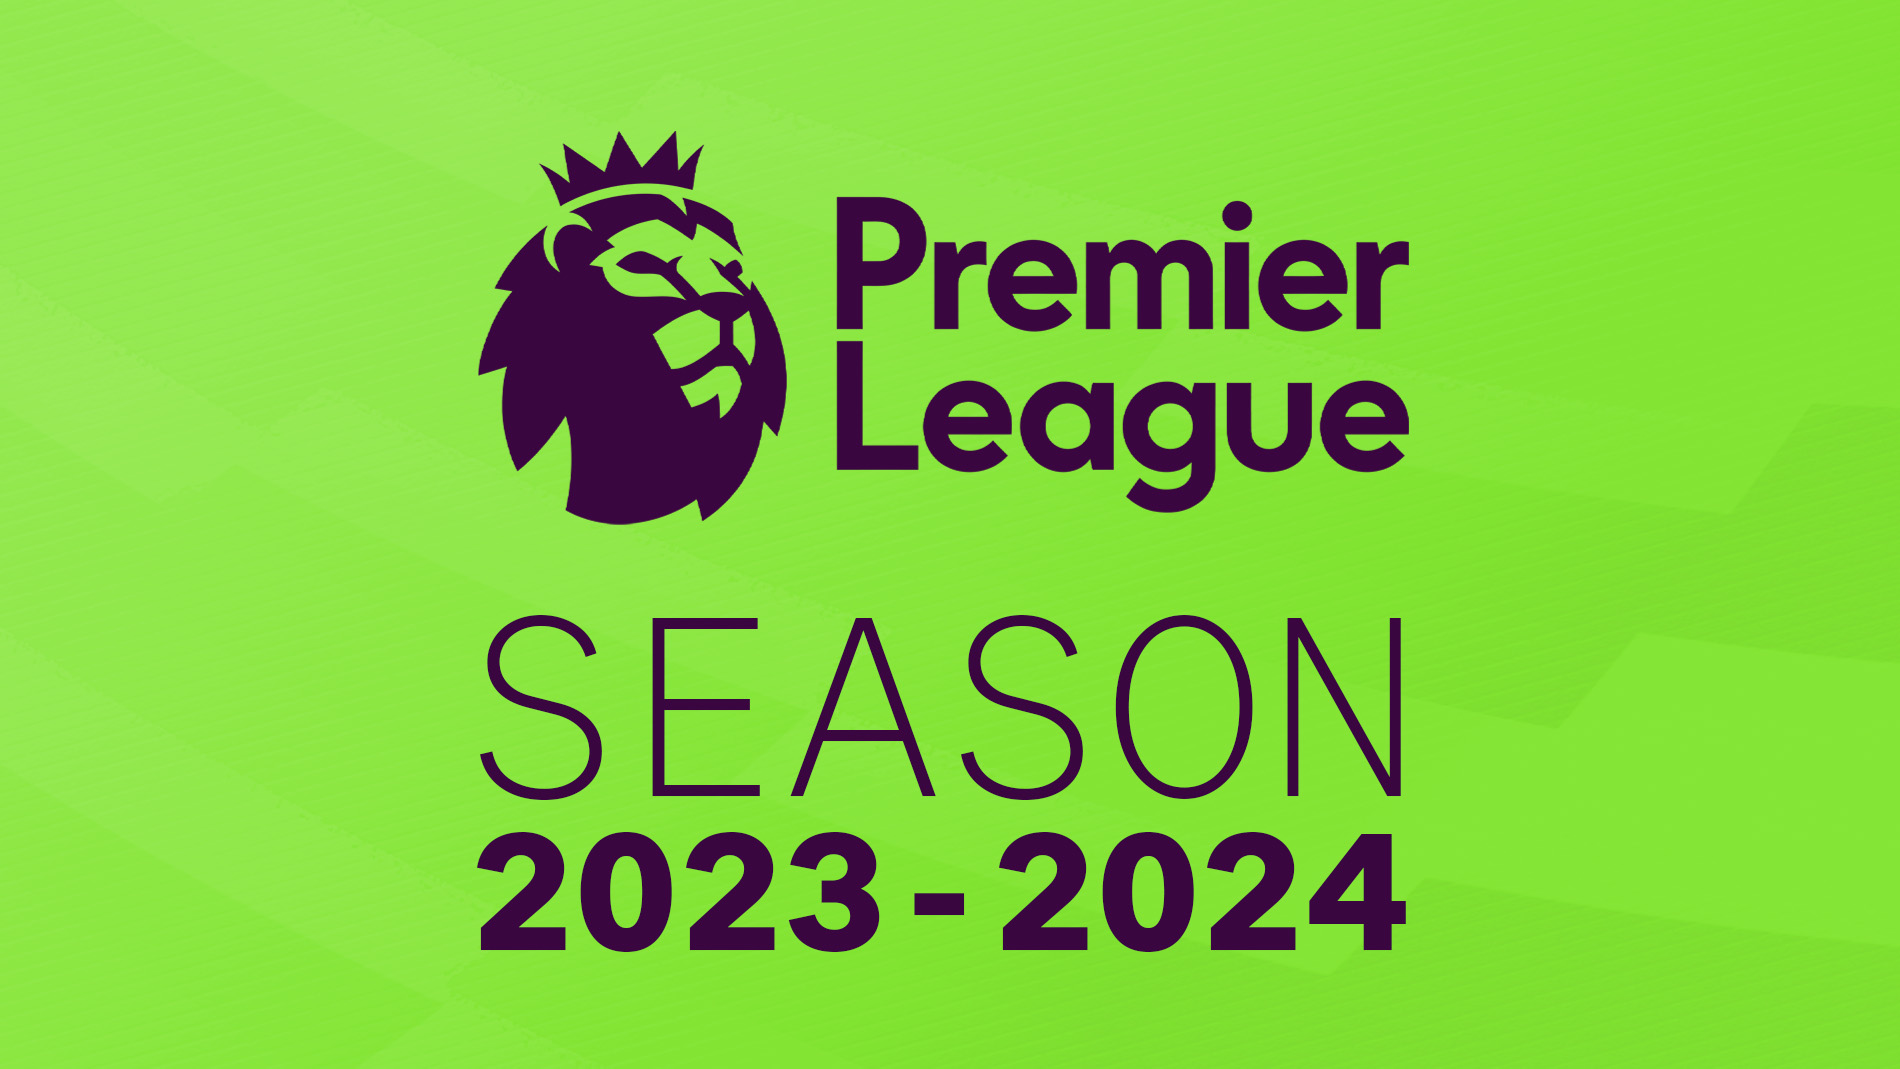 Arsenal: Premier League 2023/24 fixtures and schedule, Football News